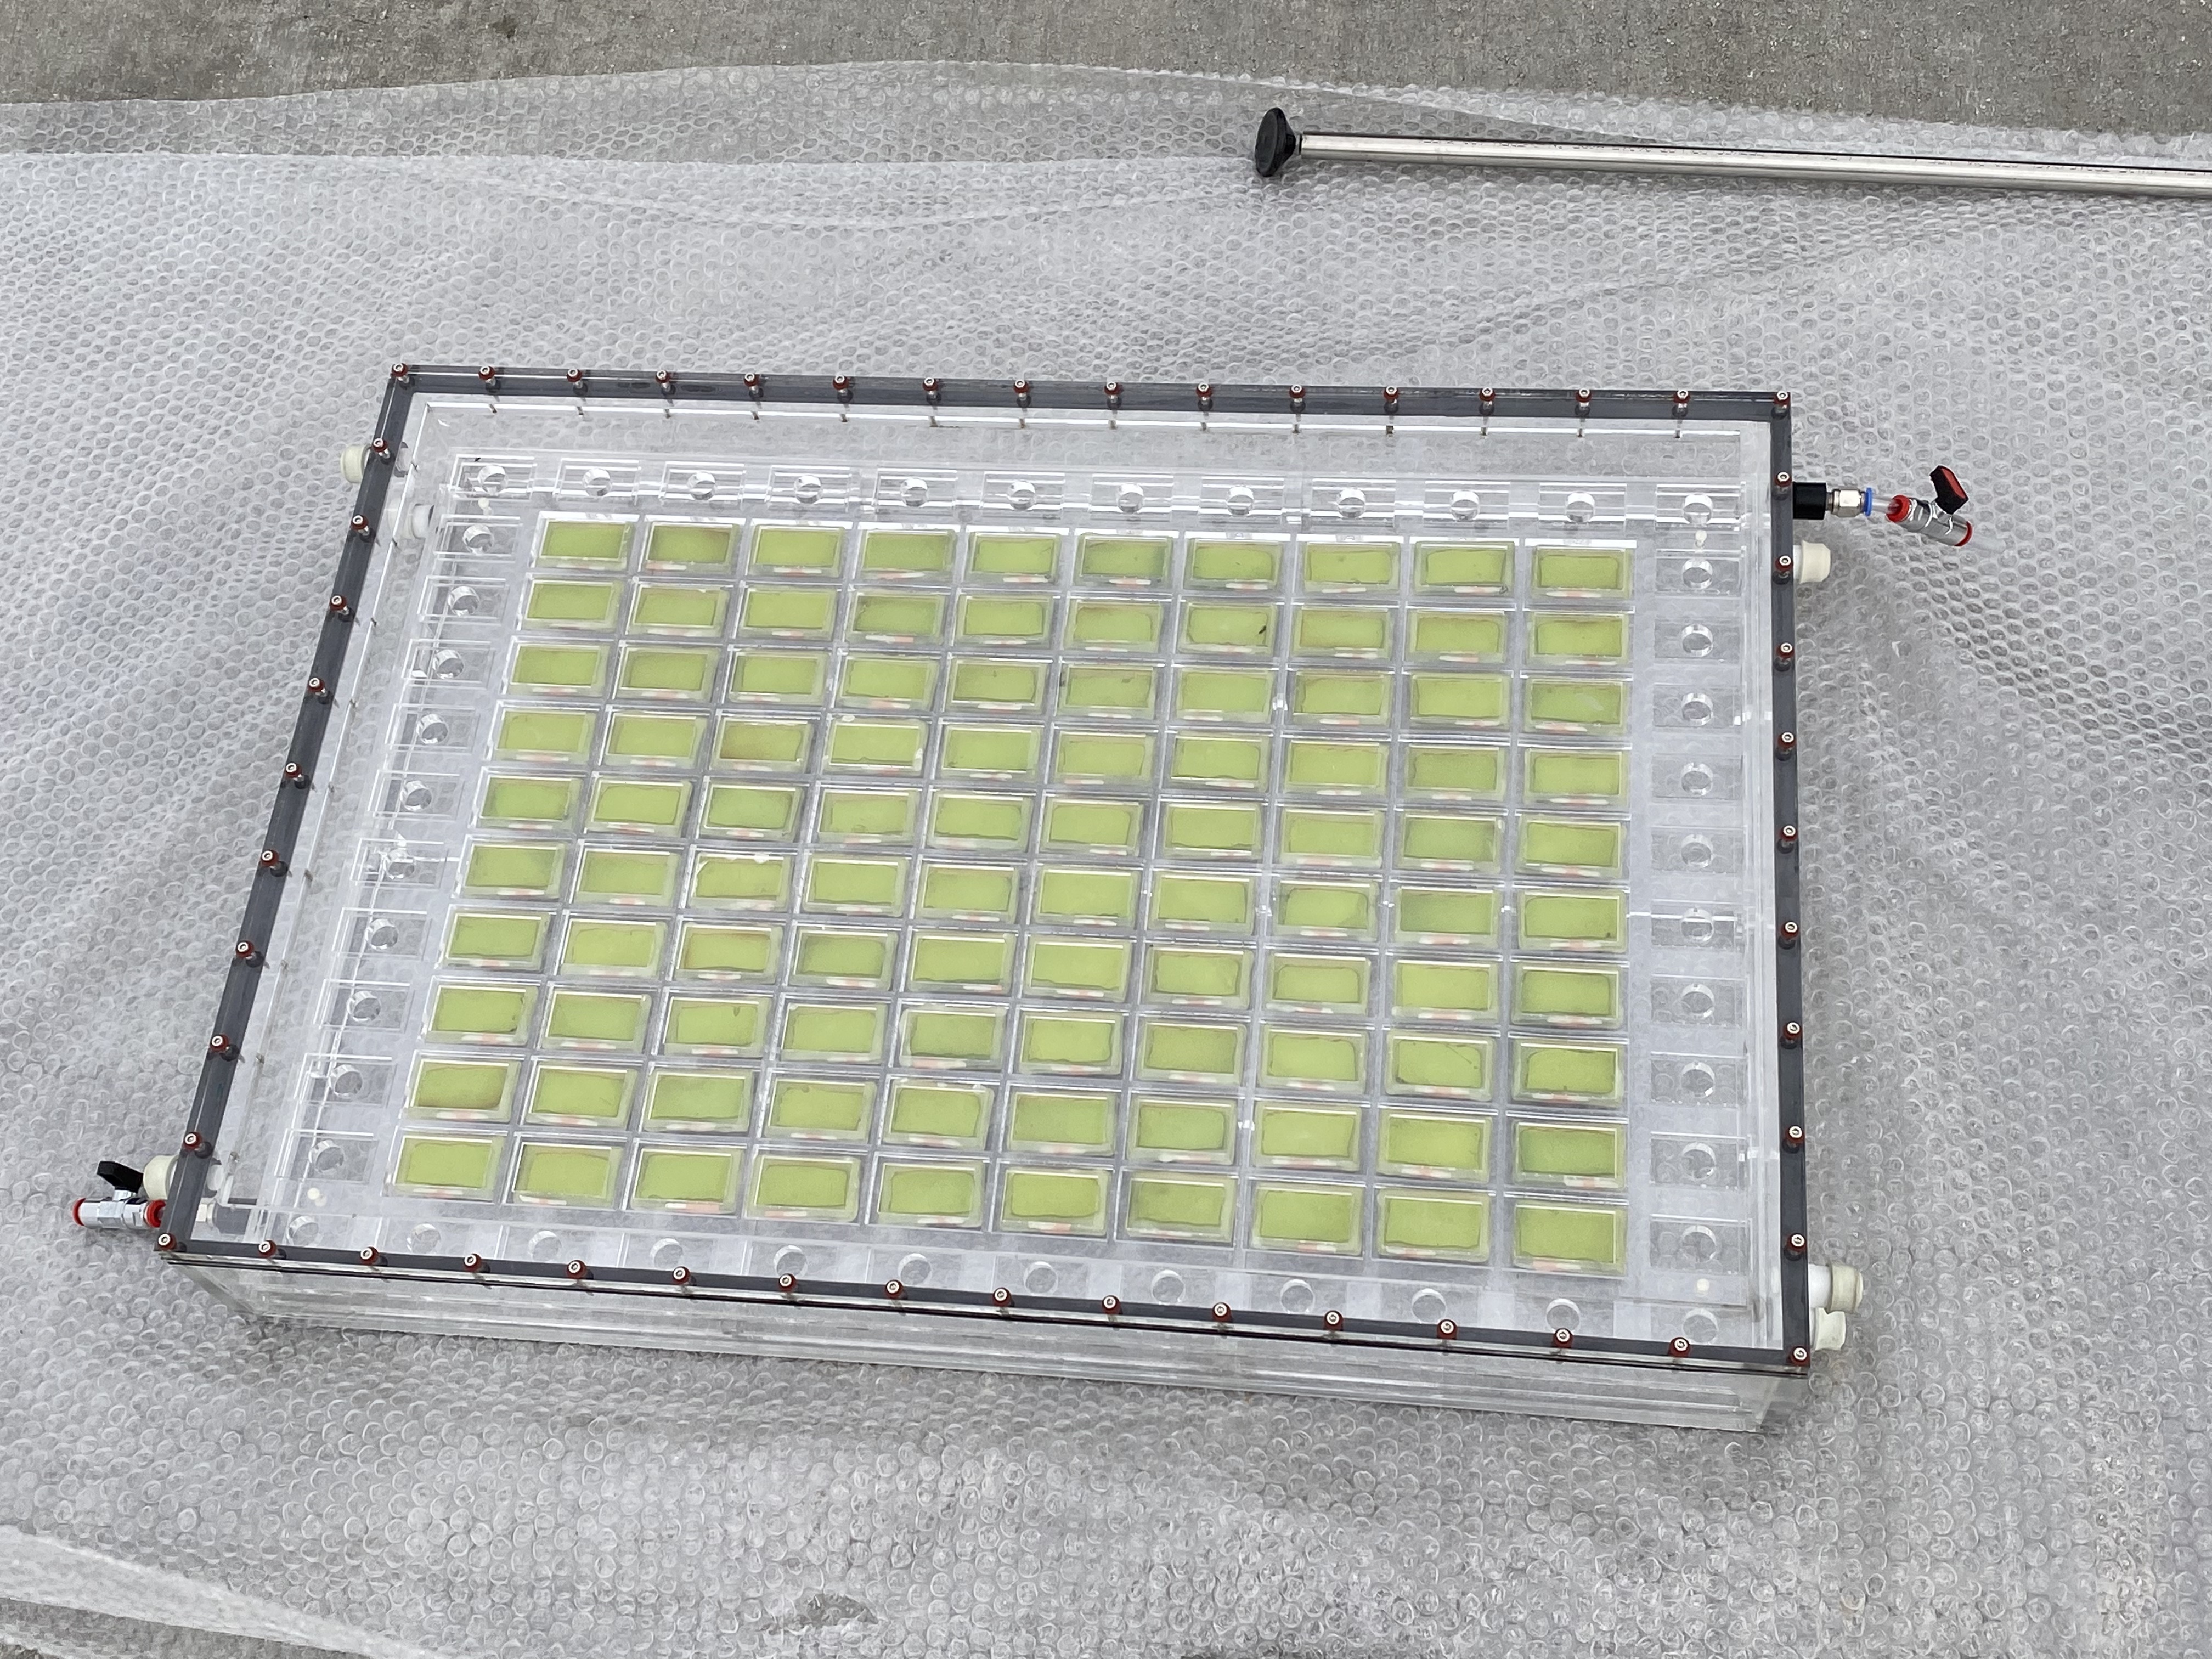 Close up of the demonstrator device: a grid of pale green rectangular cells containing the perovskite panels and catalysts capable of producing syngas from sunlight, carbon dioxide and water